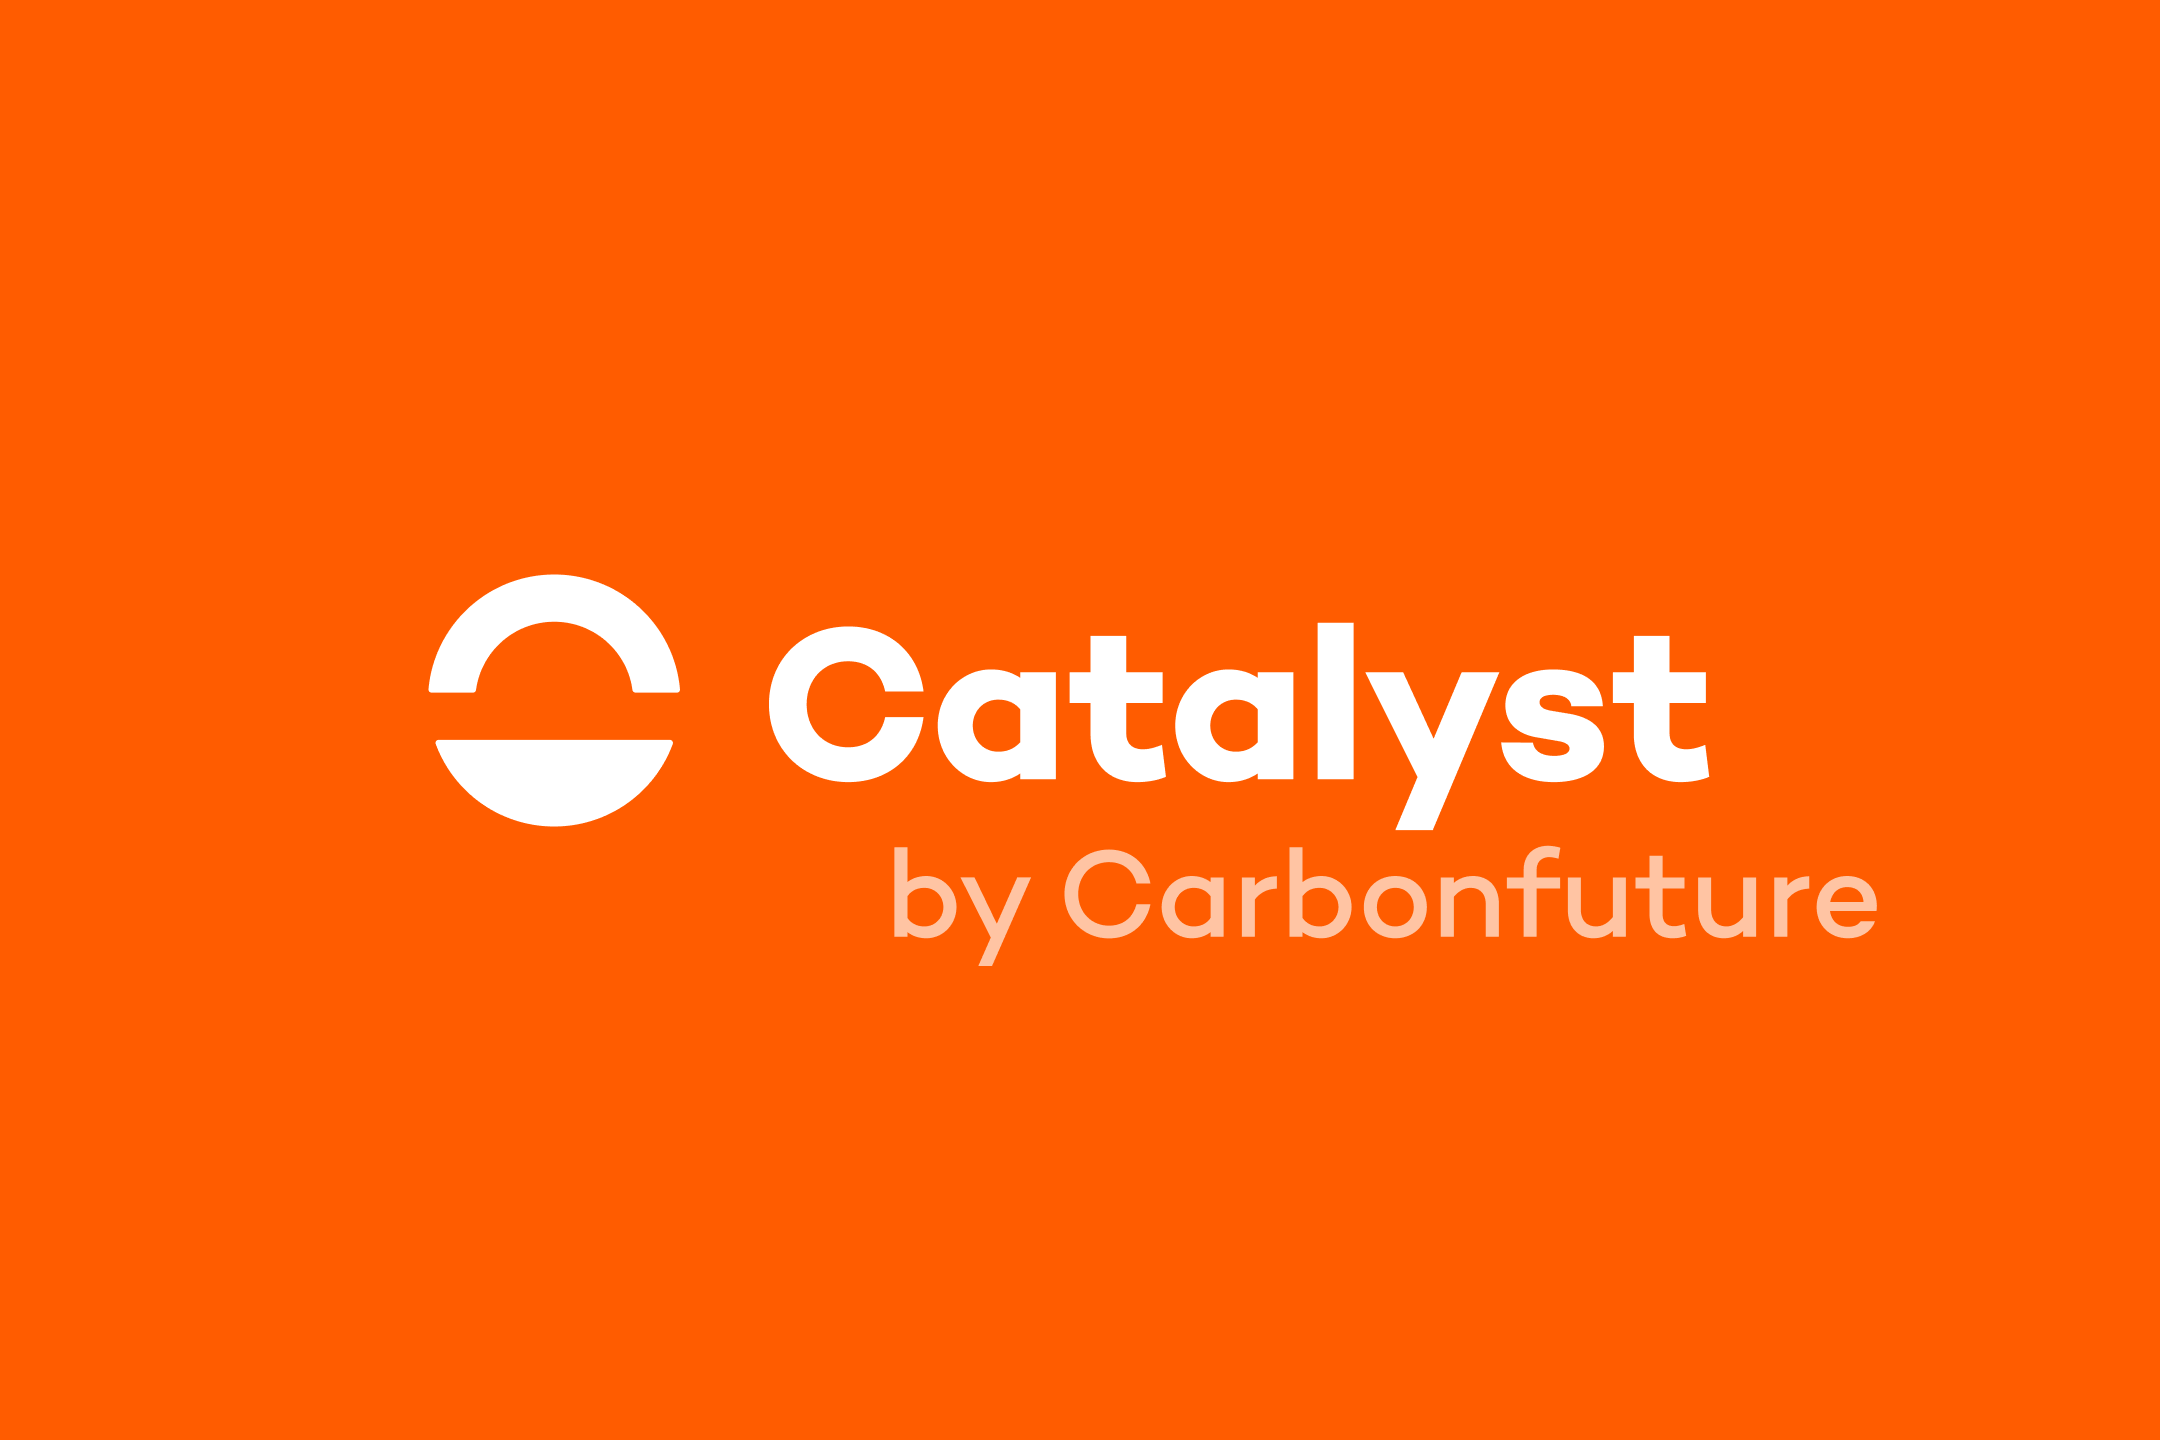 Catalyst by Carbonfuture Logo